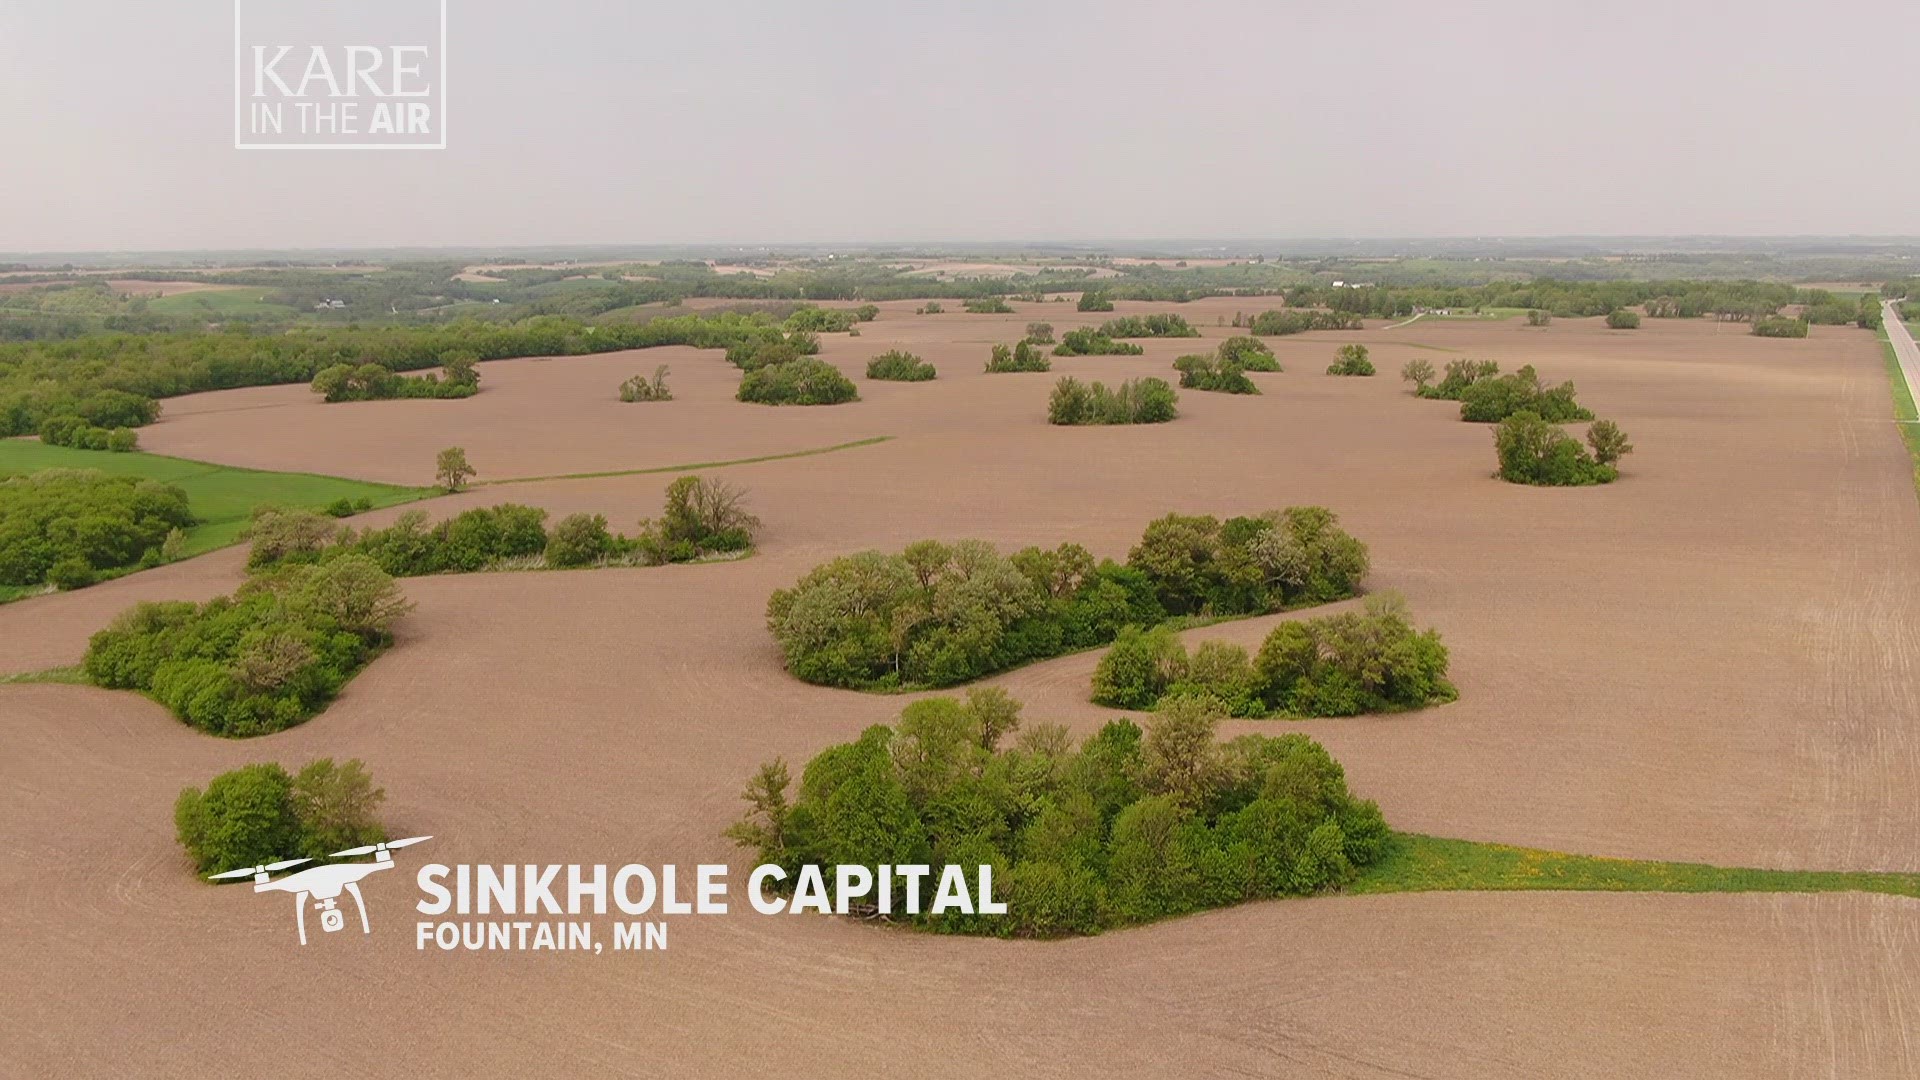 In the community of Fountain in southeastern Minnesota there are more sinkholes than people, and folks there are hoping they'll become a tourist attraction.